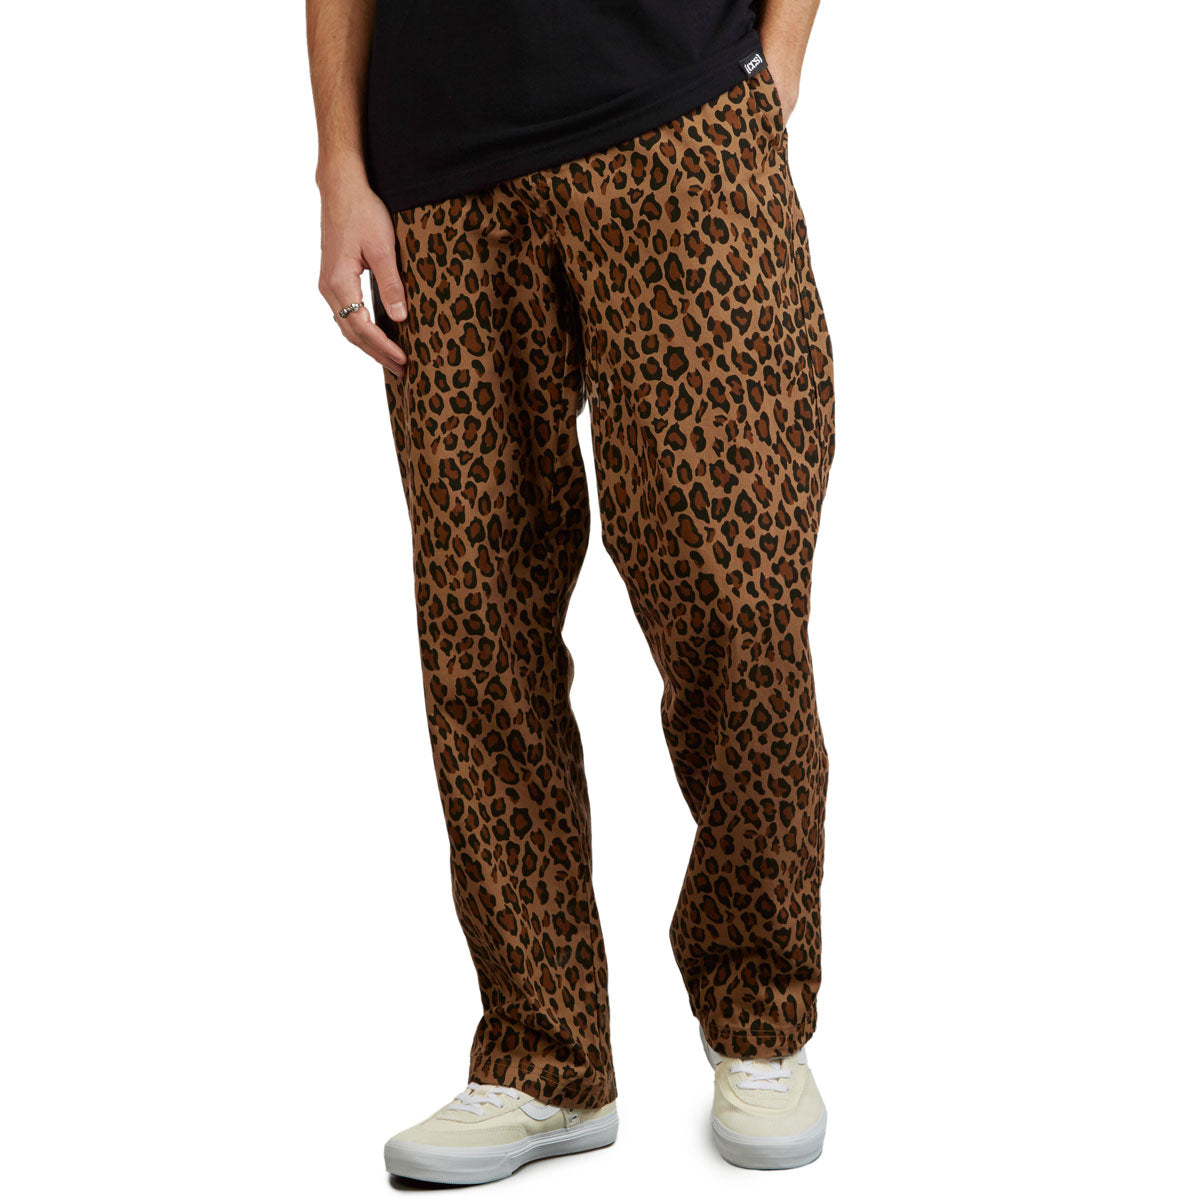 CCS Original Relaxed Chino Pants - Leopard image 1